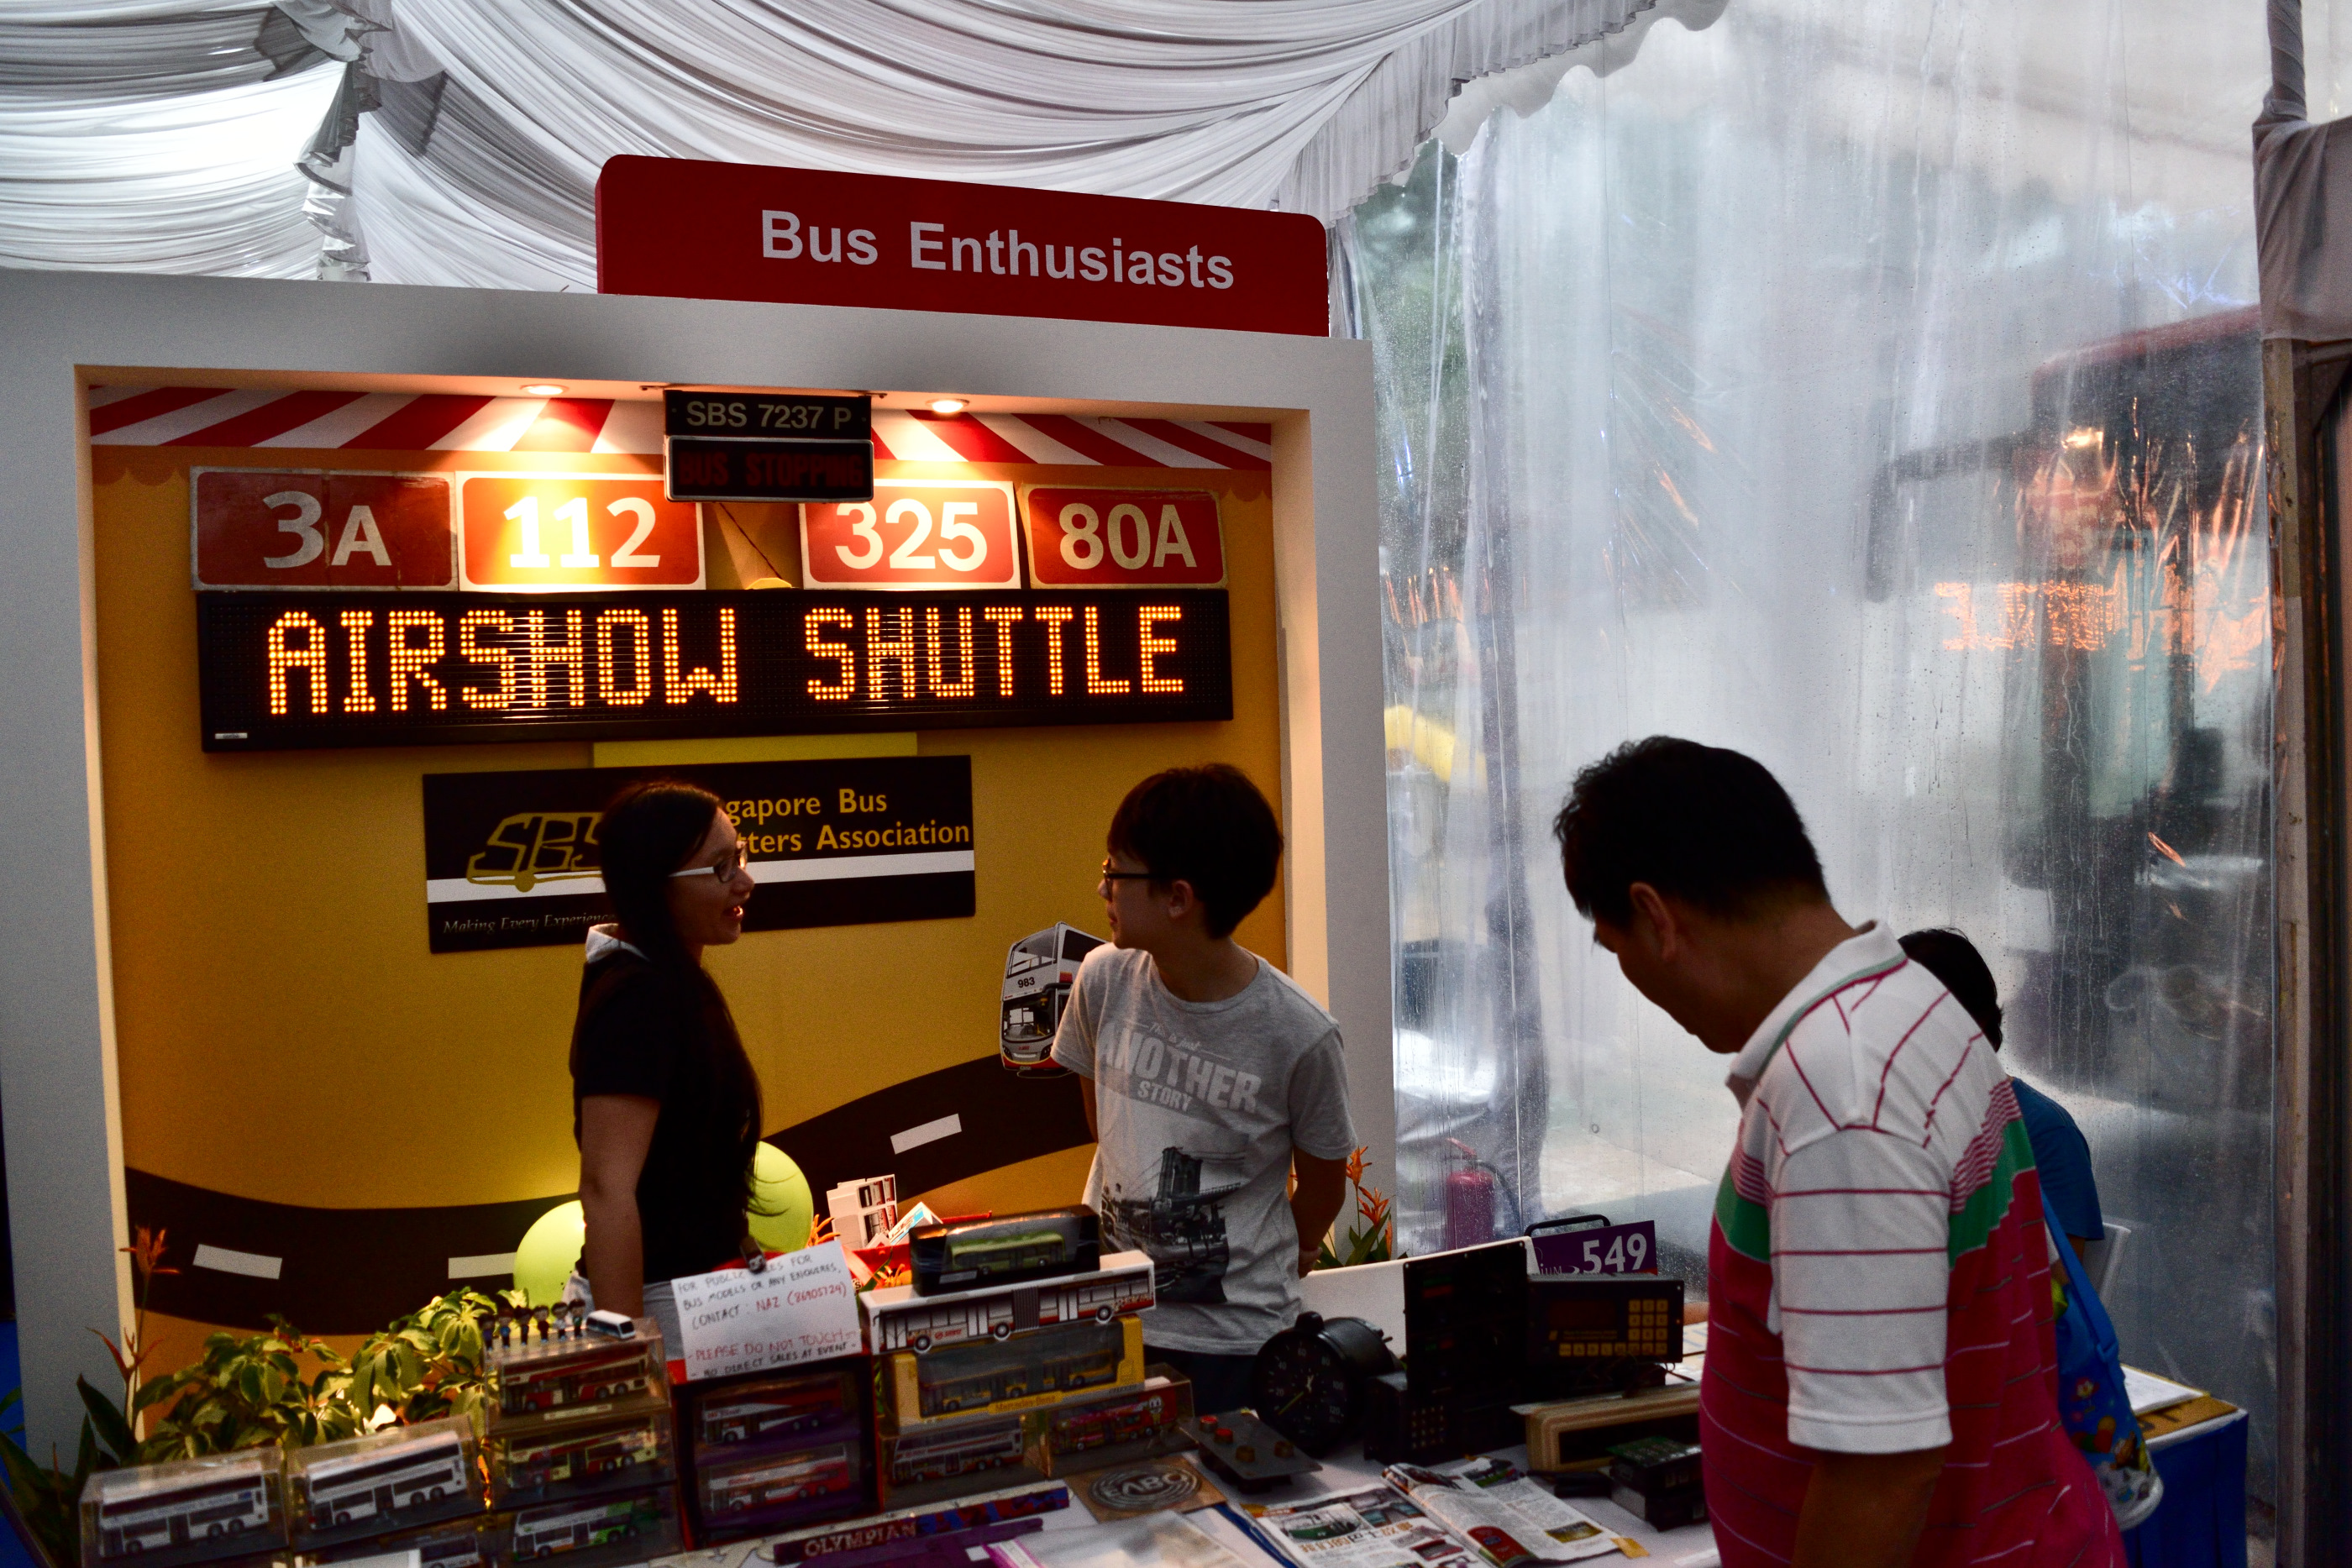 The bus enthusiasts' booth